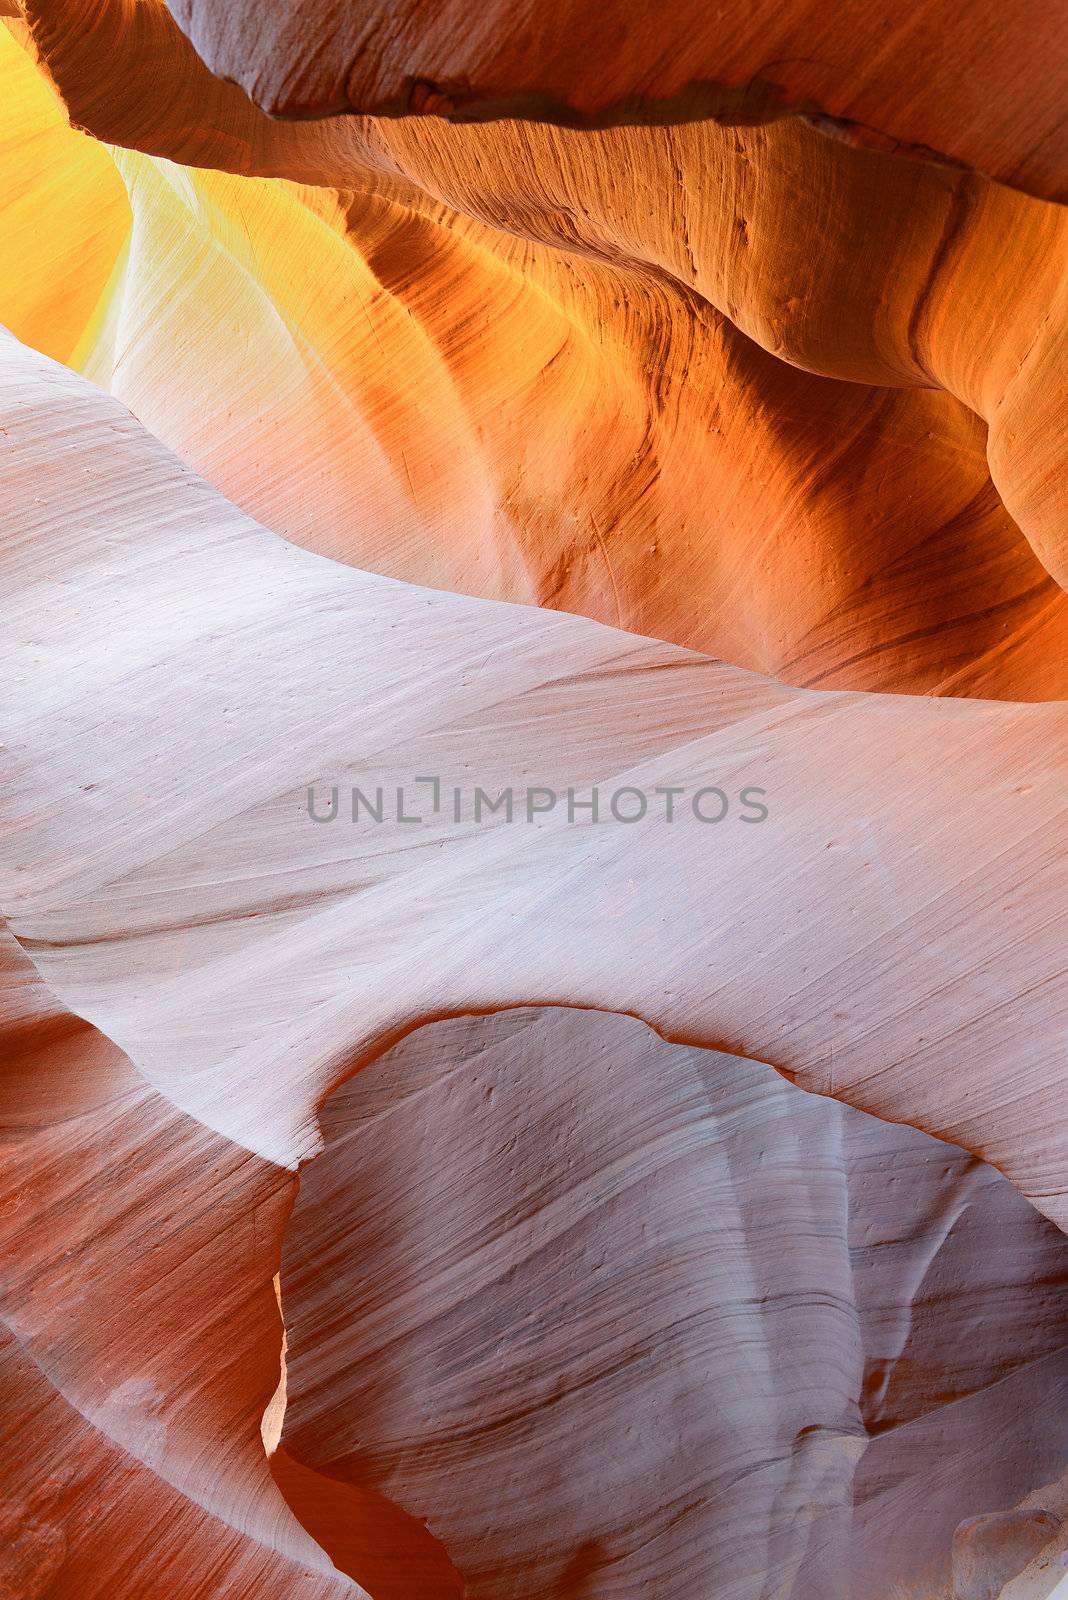 The Upper Antelope Canyon, Page, Arizona, USA. The second edition with the expanded range 